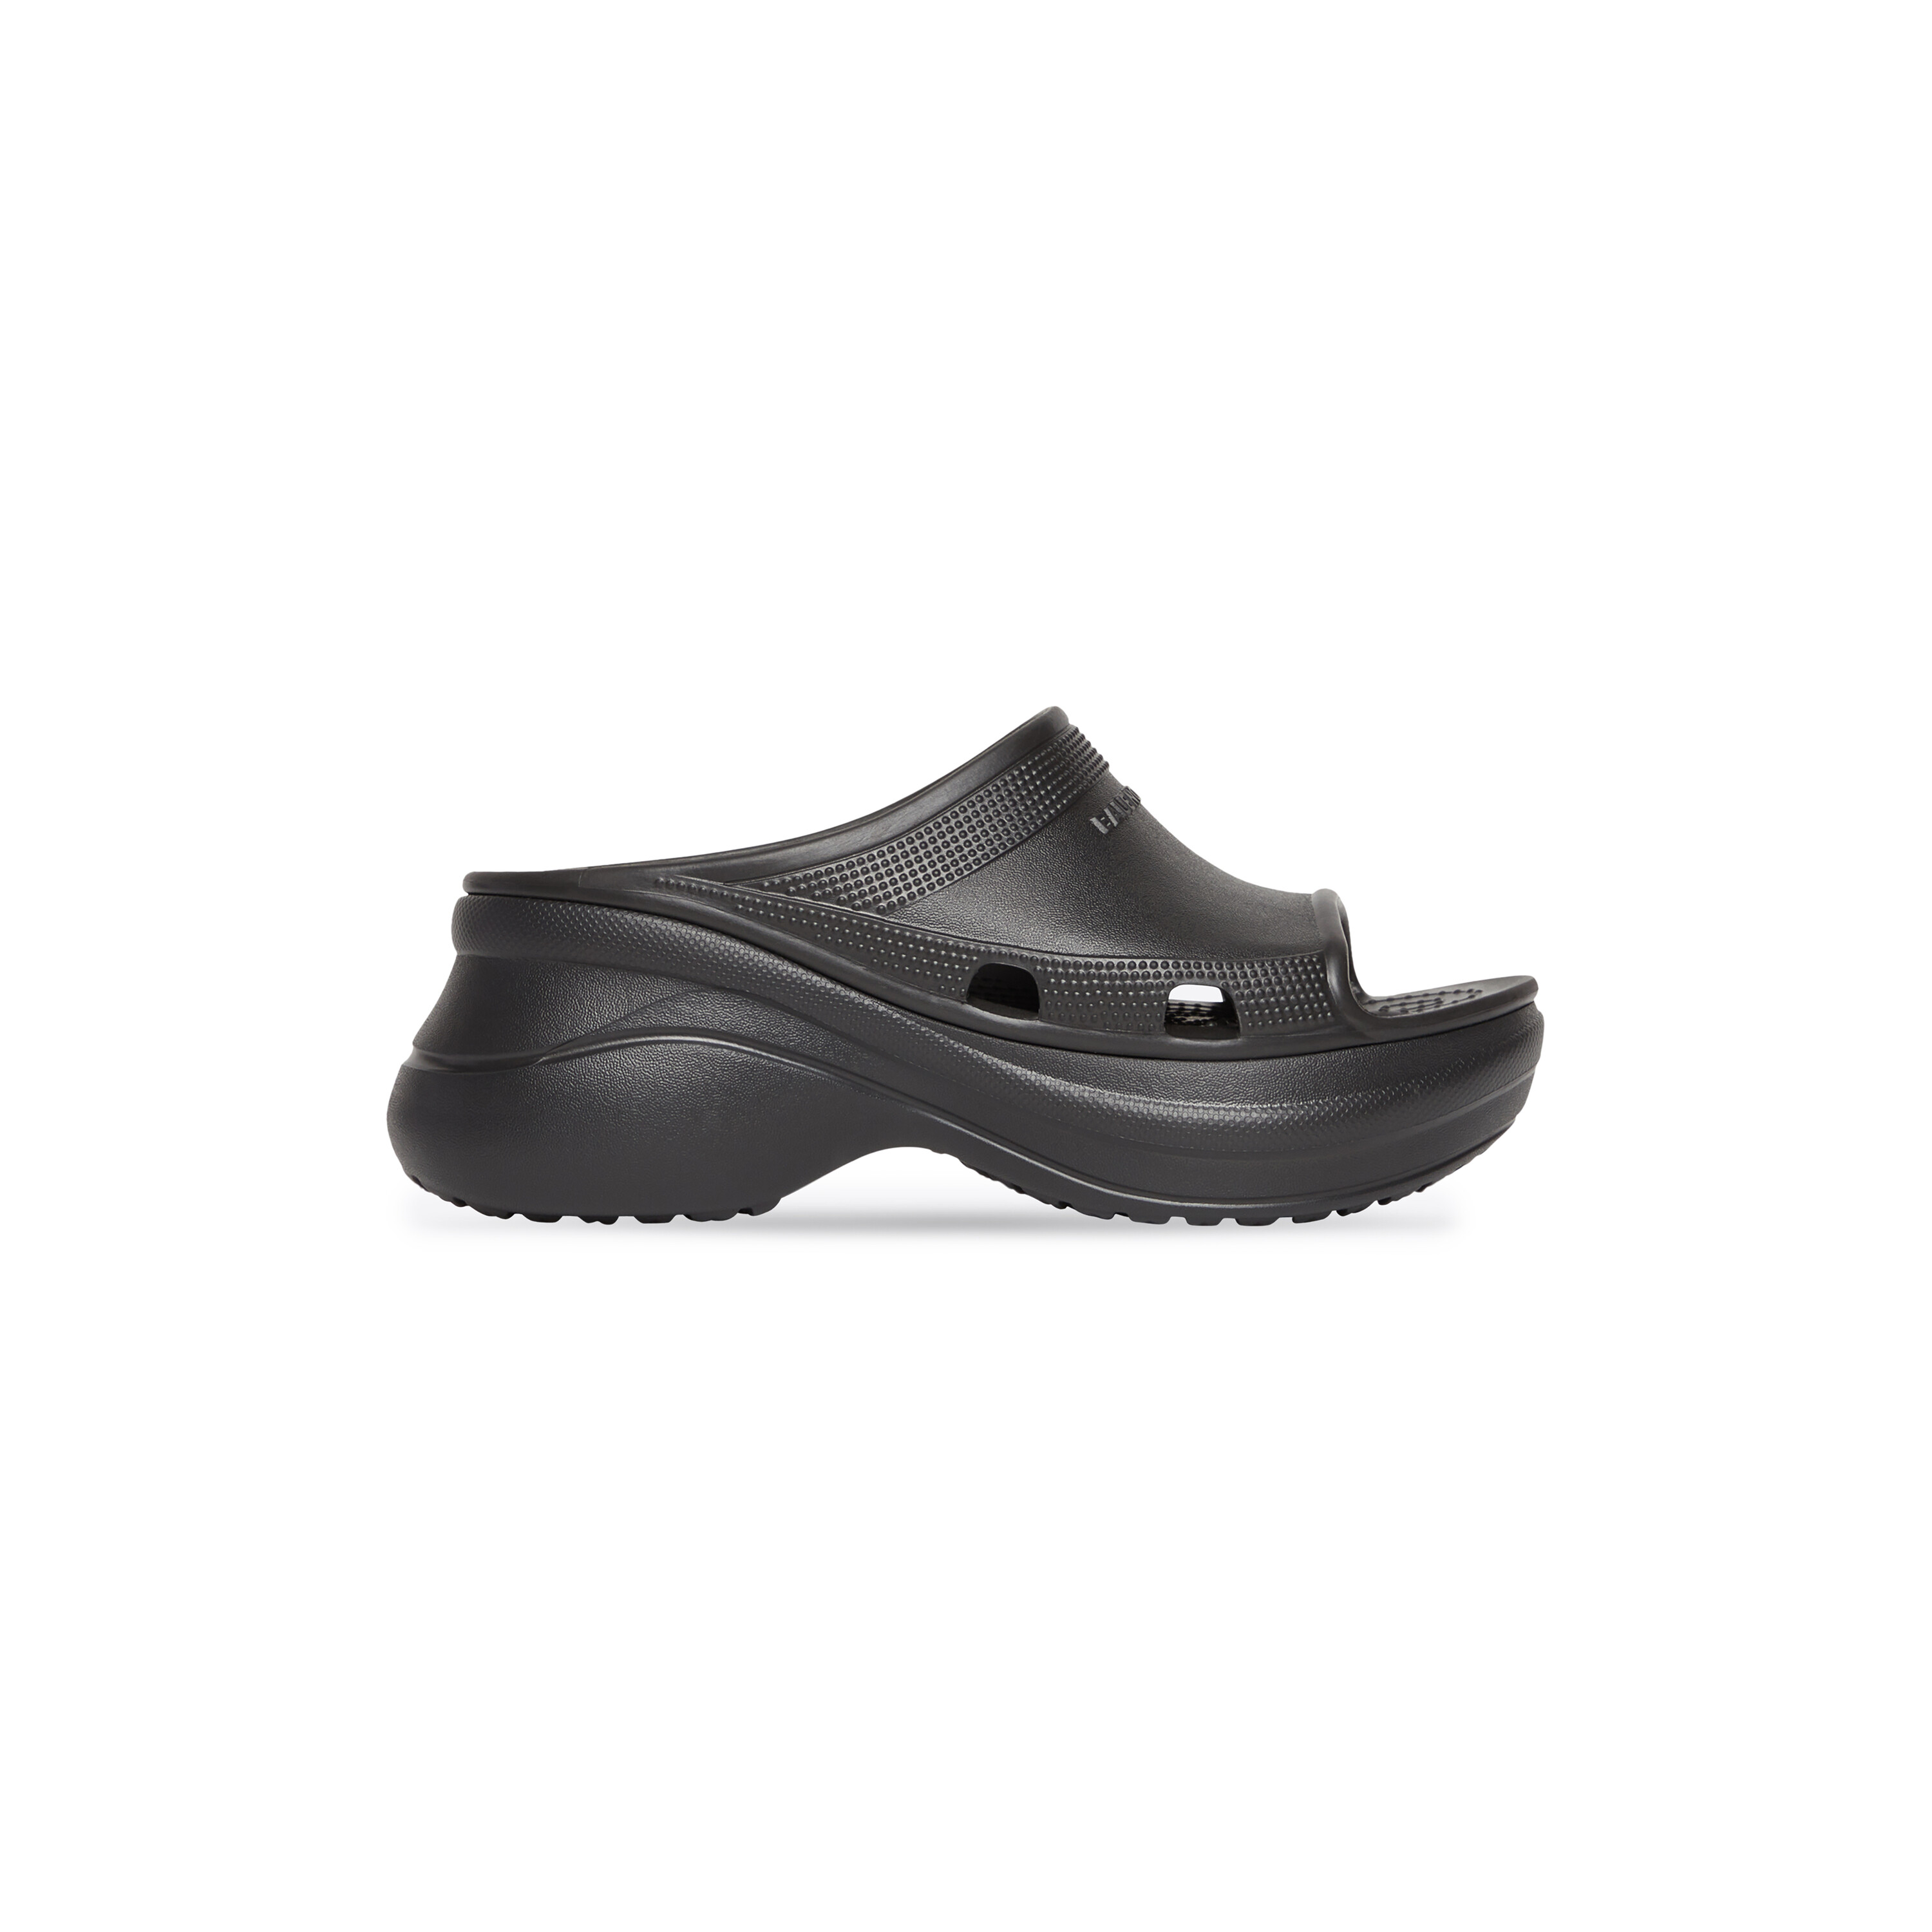 Balenciaga Crocs Pool Style: Details, Price, Photos and More – WWD